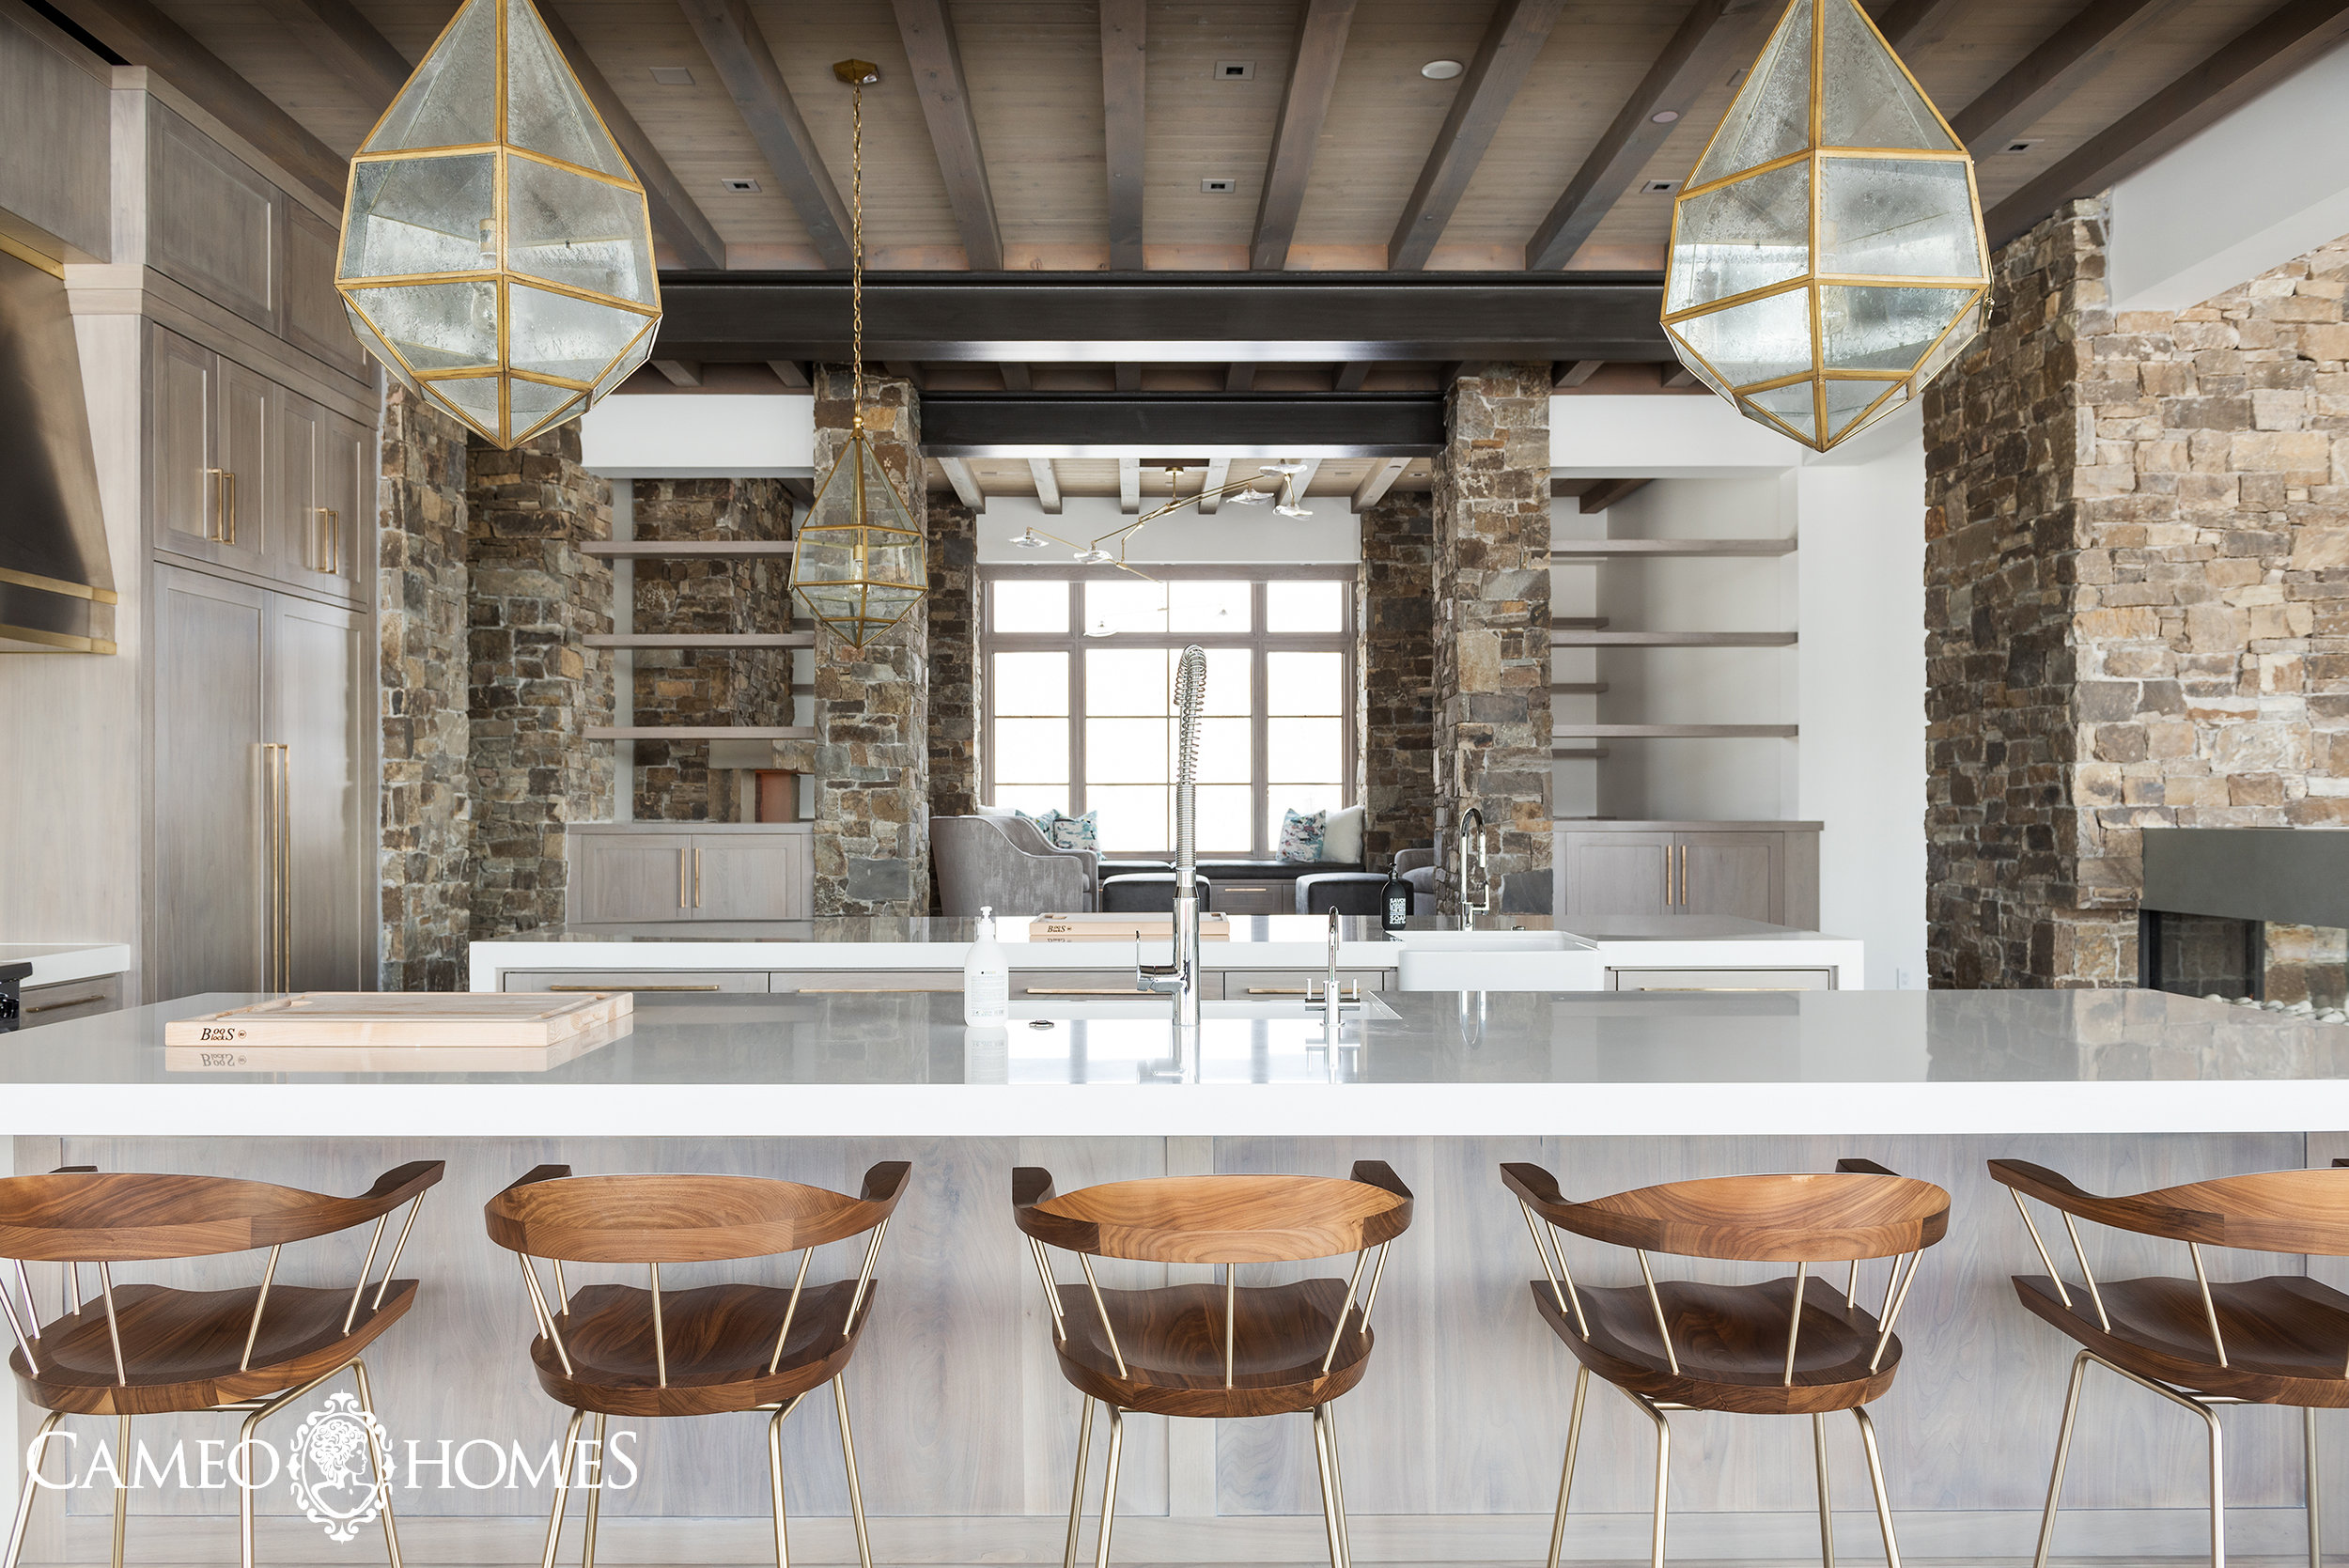 Kitchen Envy: Inspiration for a Beautifully Designed Kitchen — CAMEO HOMES